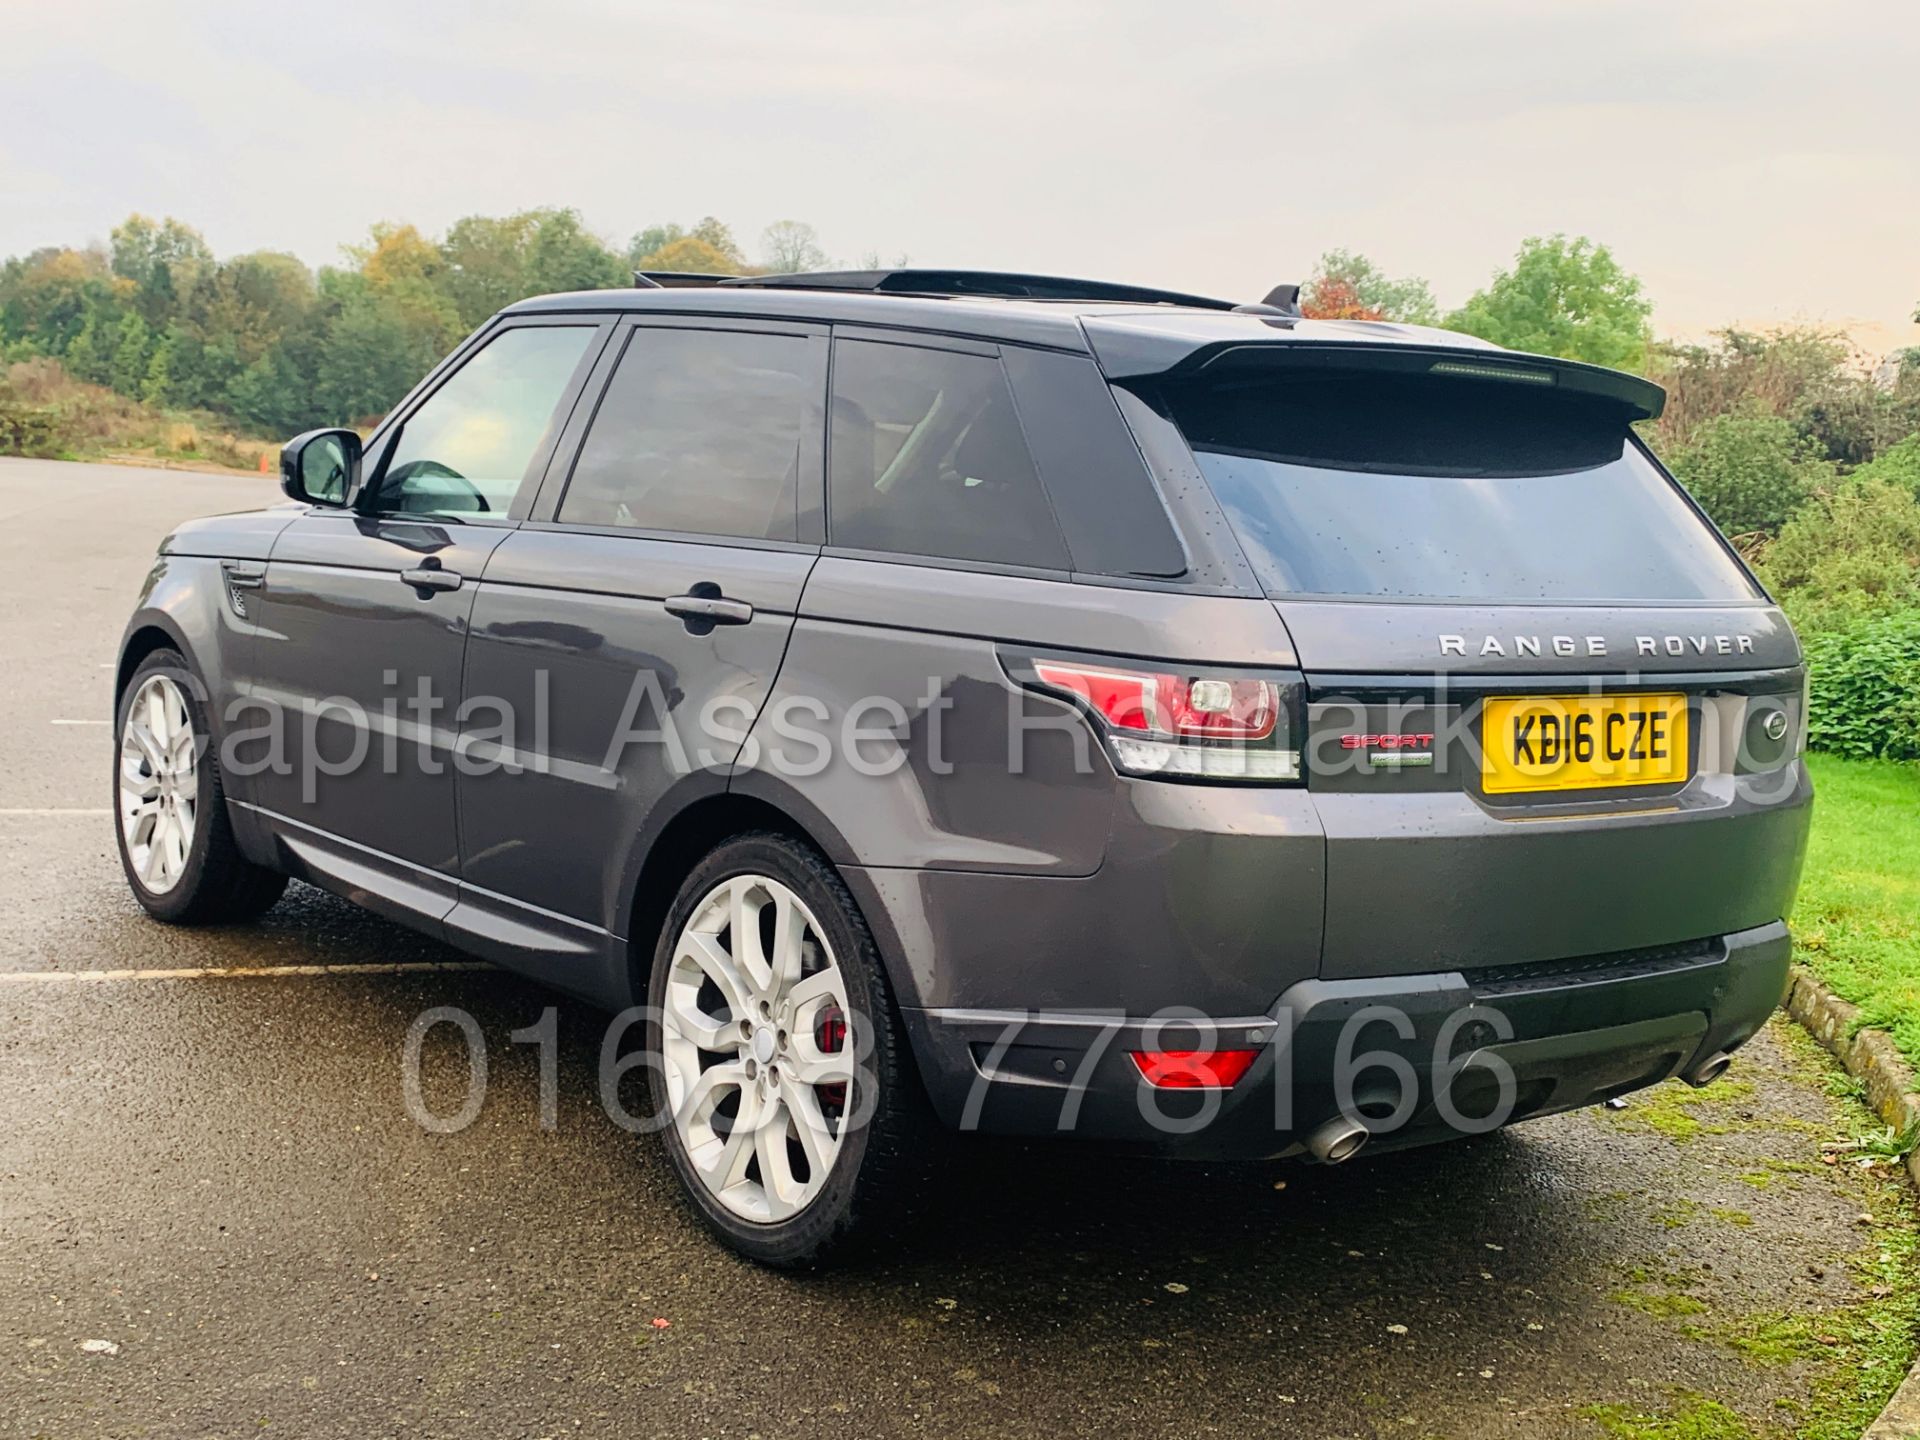 (ON SALE) RANGE ROVER SPORT 3.0 SDV6 *AUTOBIOGRAPHY DYNAMIC*AUTO *FULLY LOADED* MONSTER SPEC *16 REG - Image 5 of 70